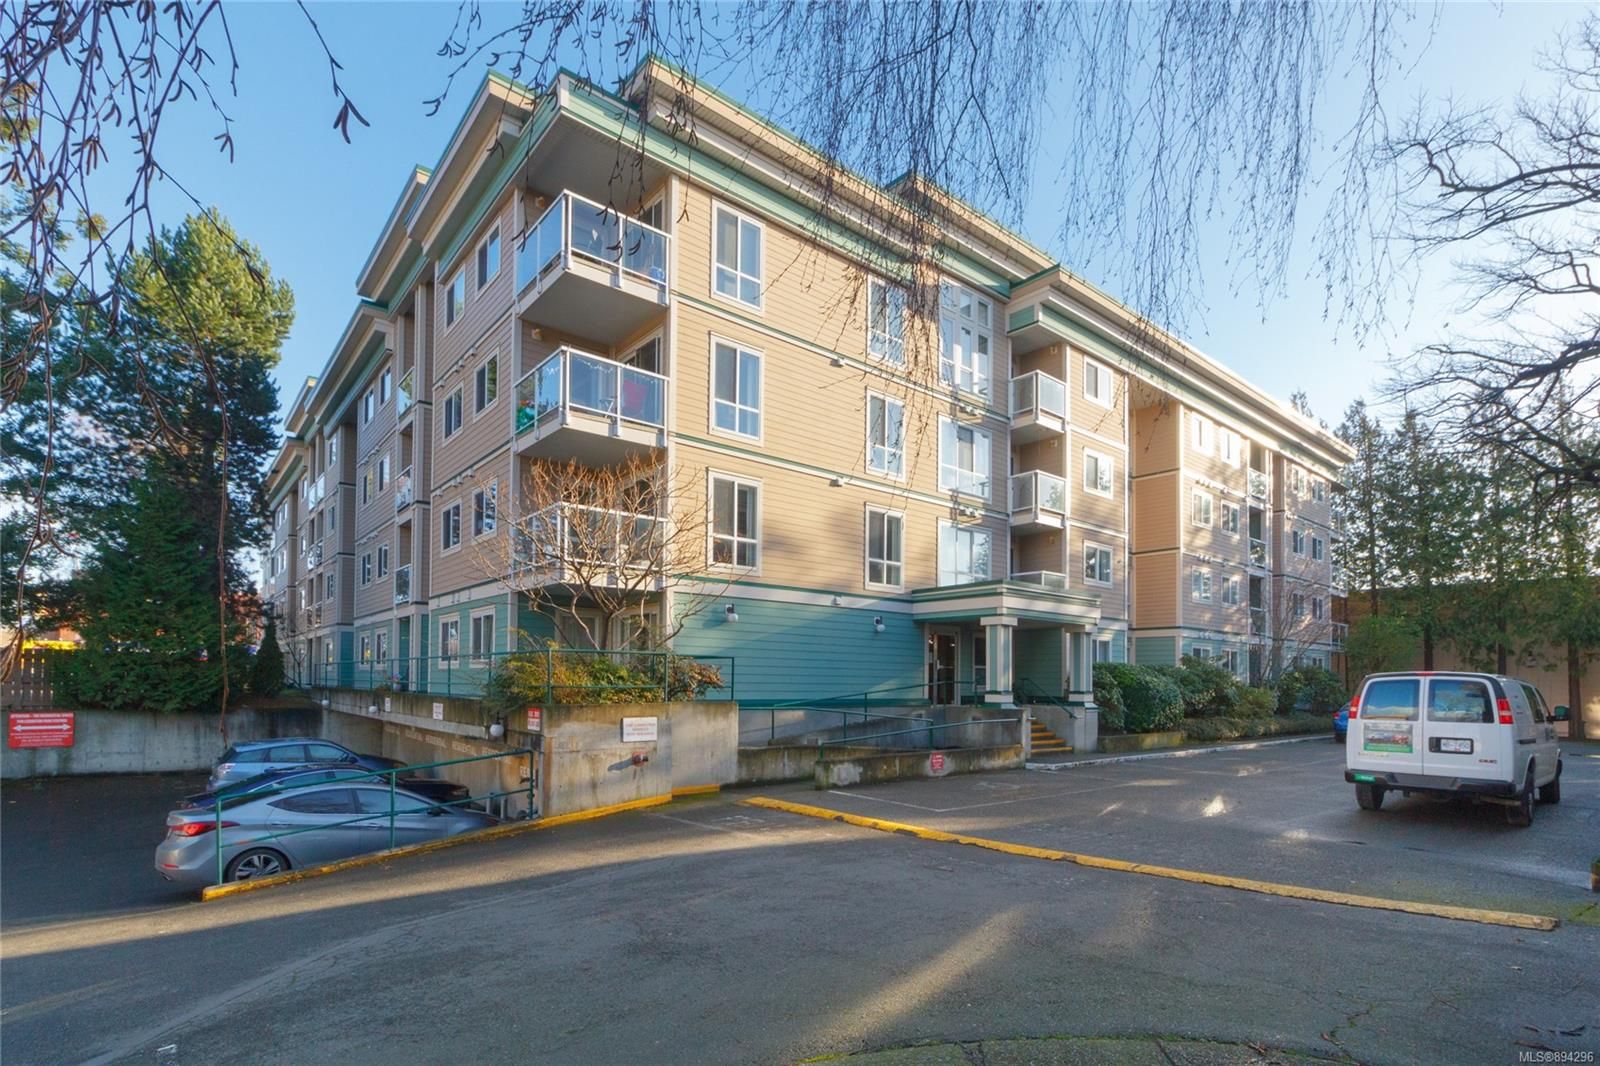 Main Photo: VICTORIA REAL ESTATE IN BC = Downtown 2 Bedroom Condo For Sale SOLD MLS # 894296